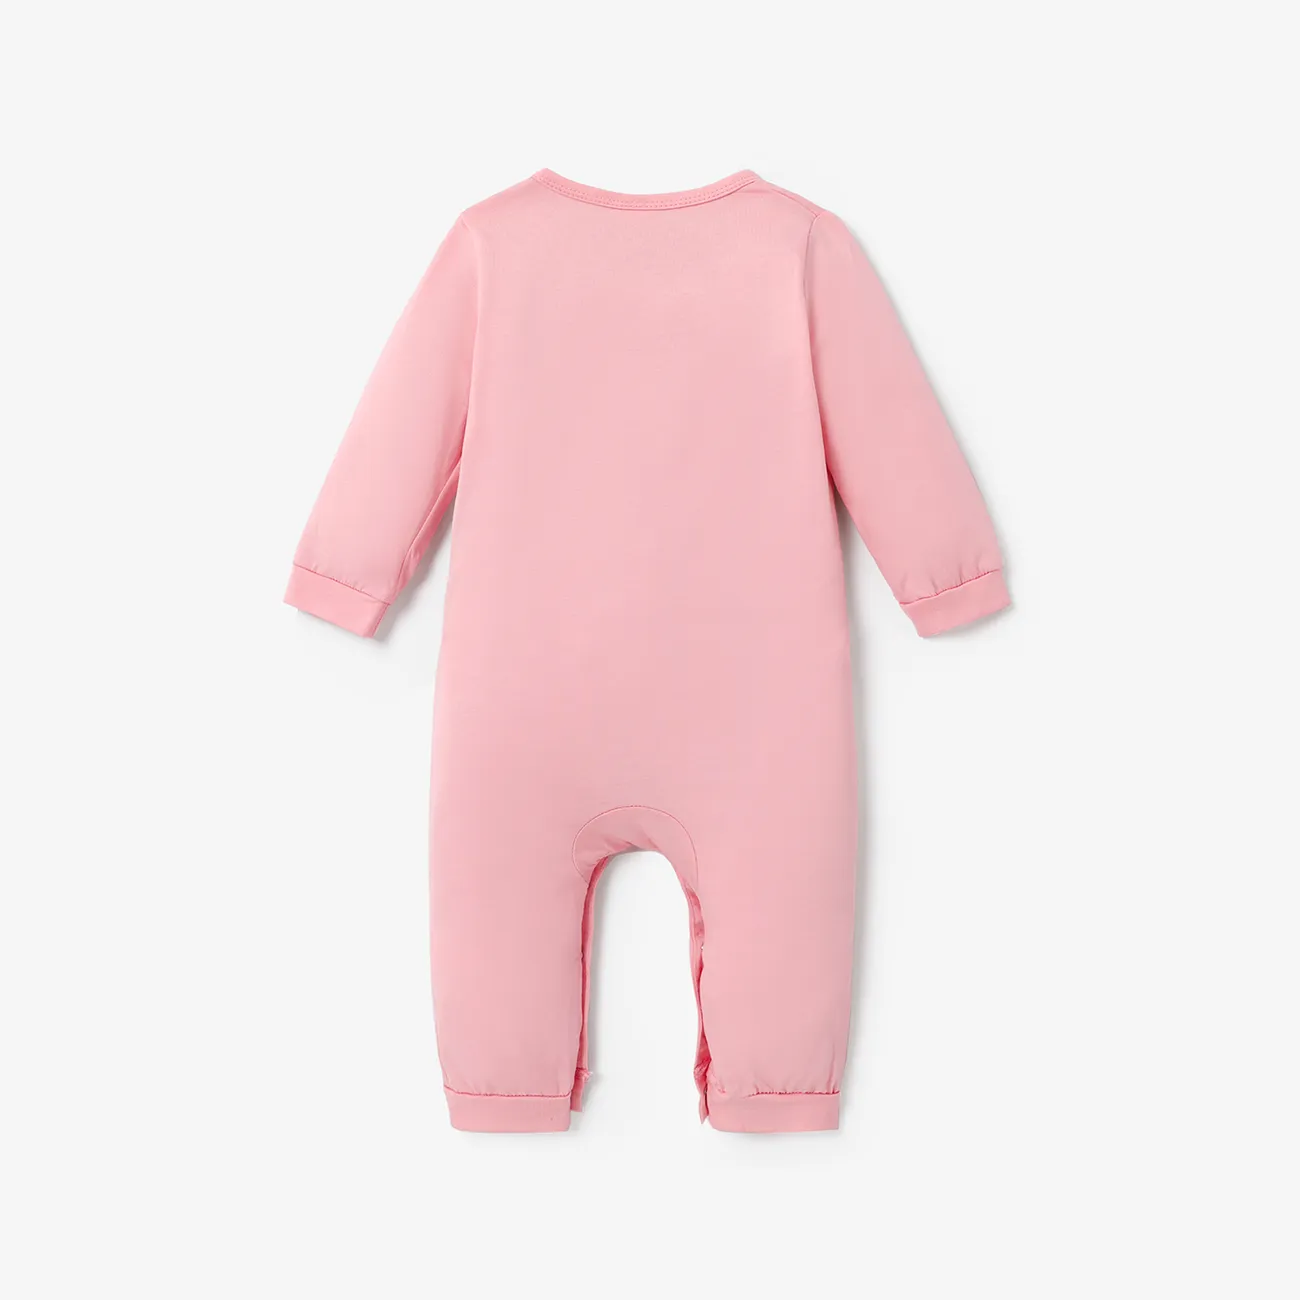 100% Cotton Letter and Heart Print Long-sleeve Gery Baby Jumpsuit Pink big image 1